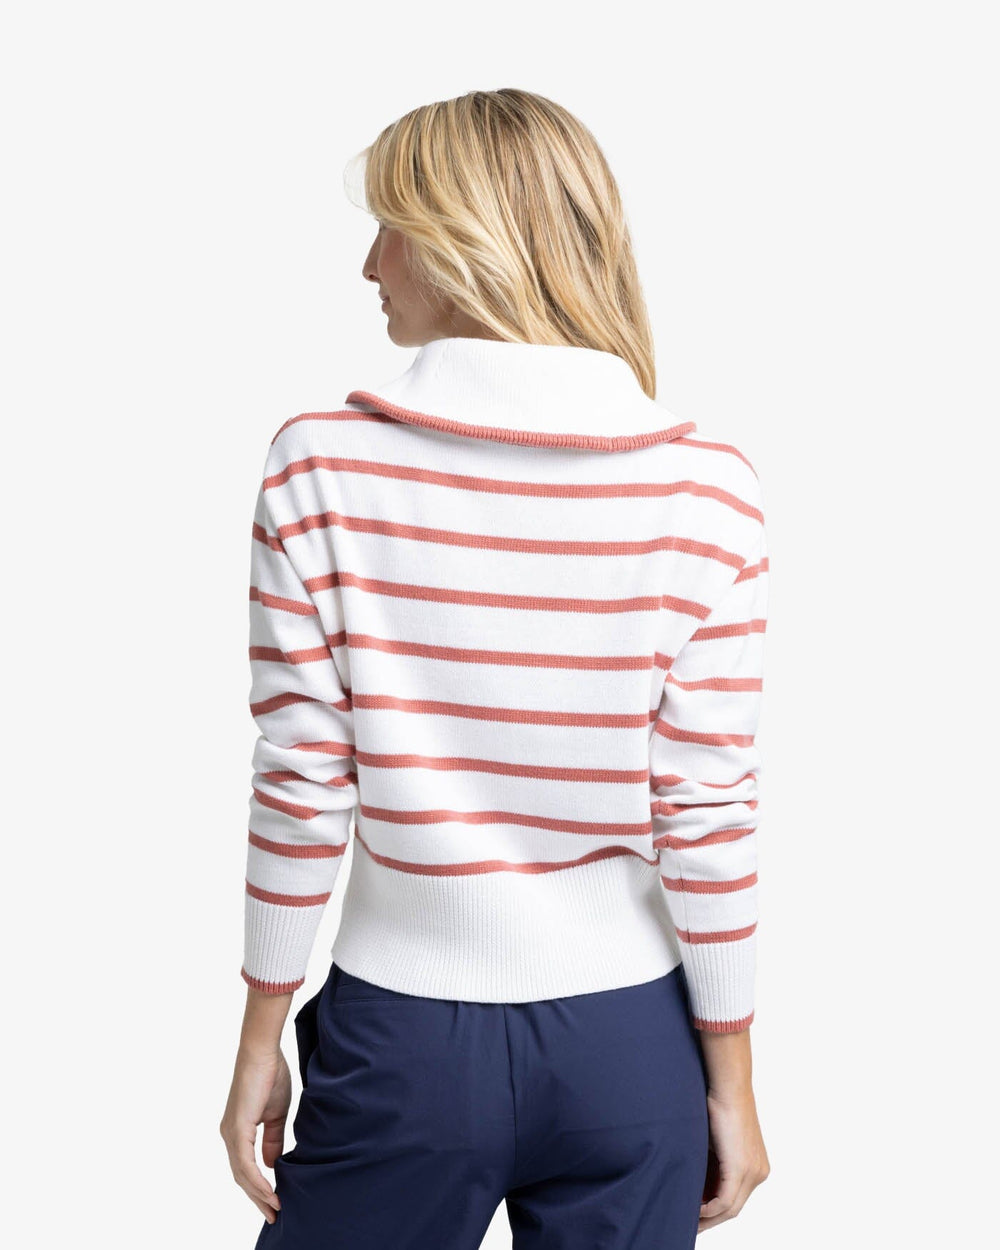 The back view of the Southern Tide Maizy Sweater by Southern Tide - Dusty Coral